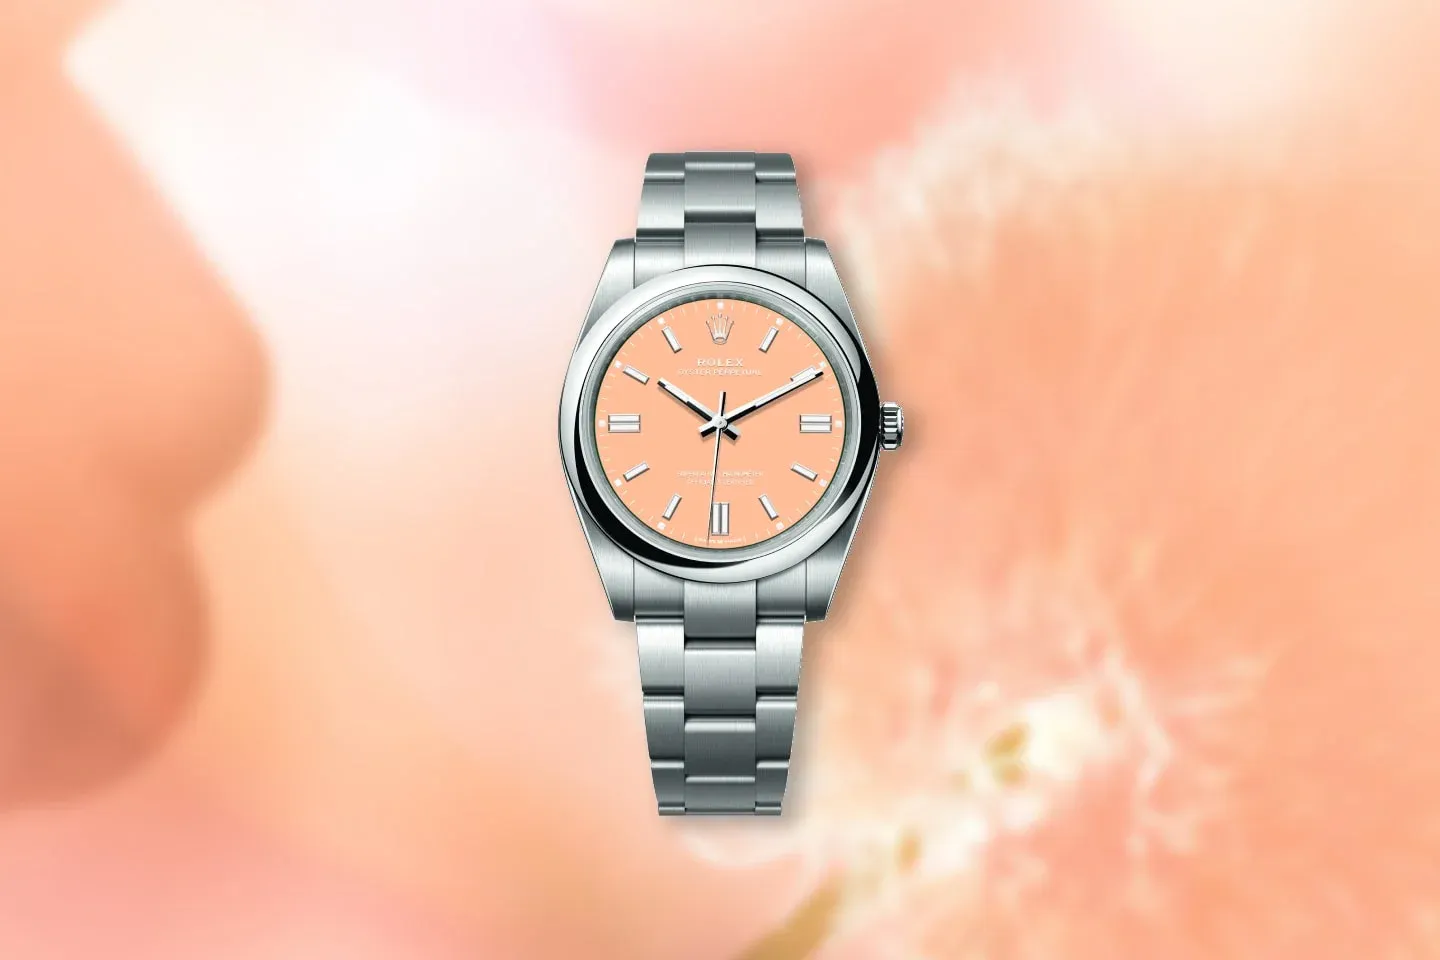 Concept image of a Rolex Oyster Perpetual with the Pantone 13-1023 Peach Fuzz colored dial